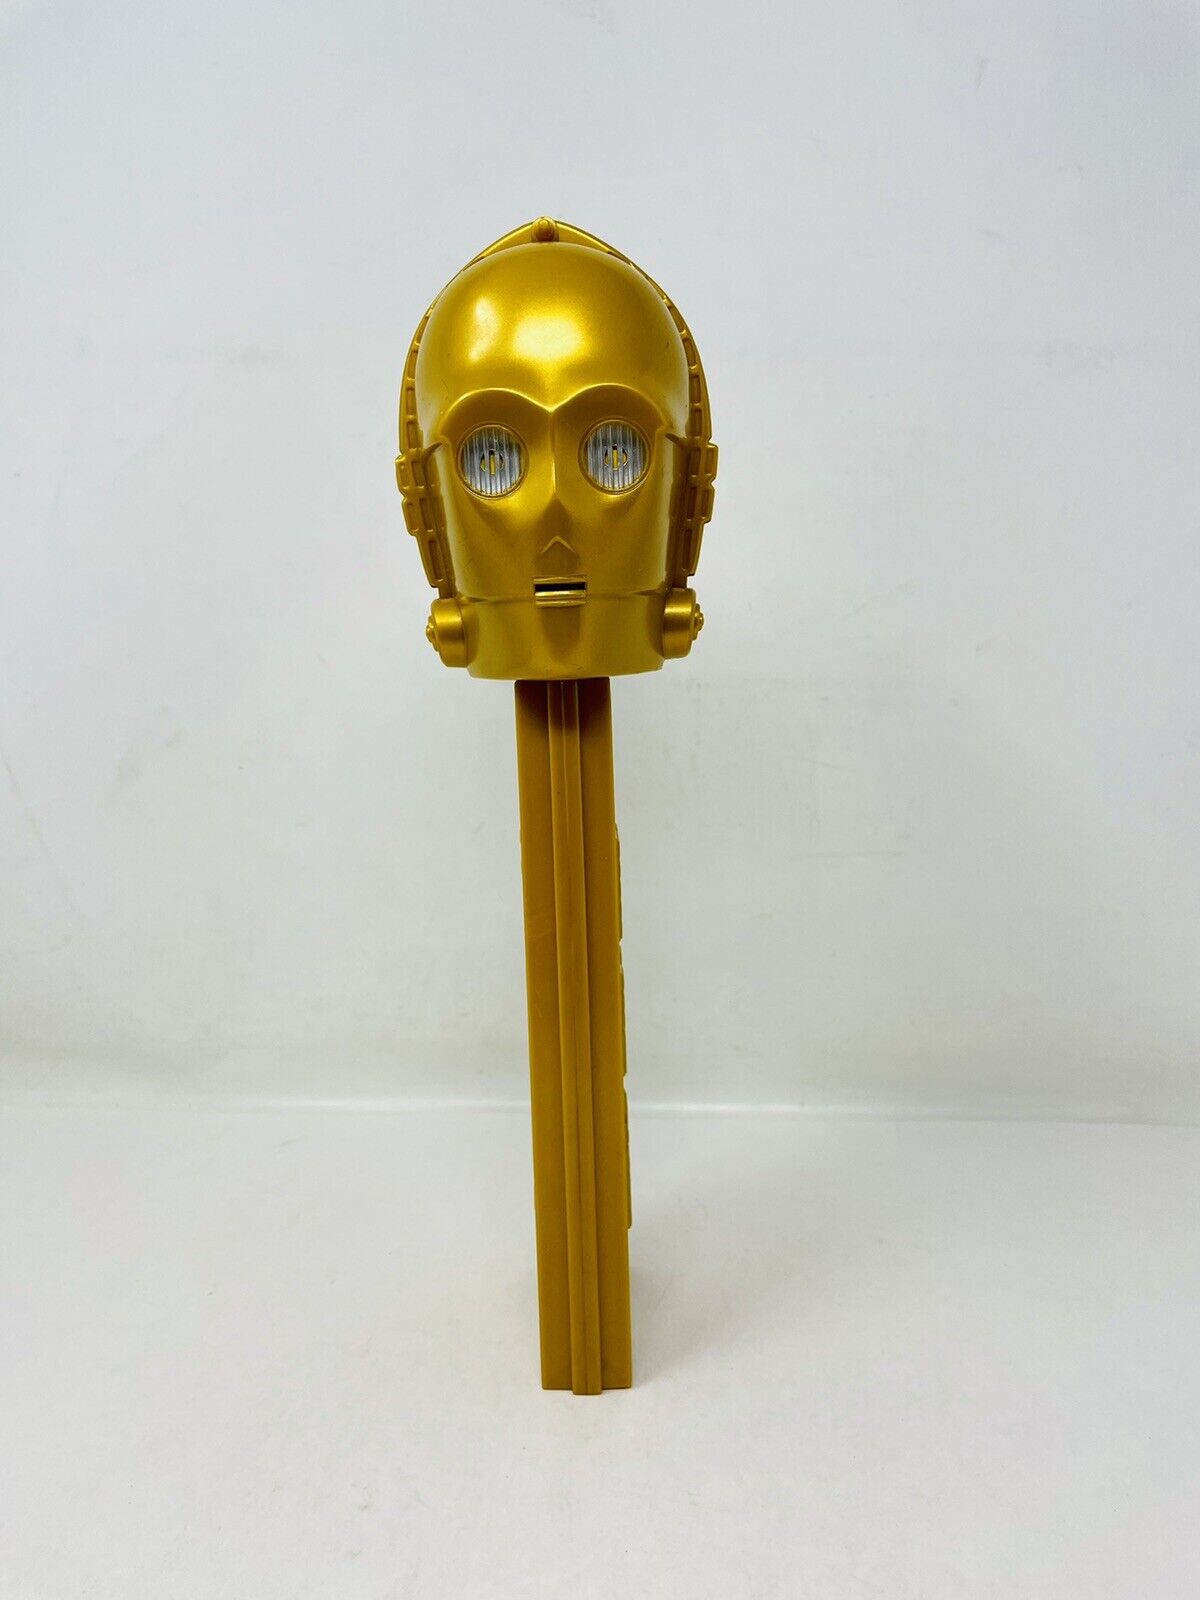 Star Wars Giant 12” Musical Pez Candy Dispenser 2005 C-3 PO No Feet Tested